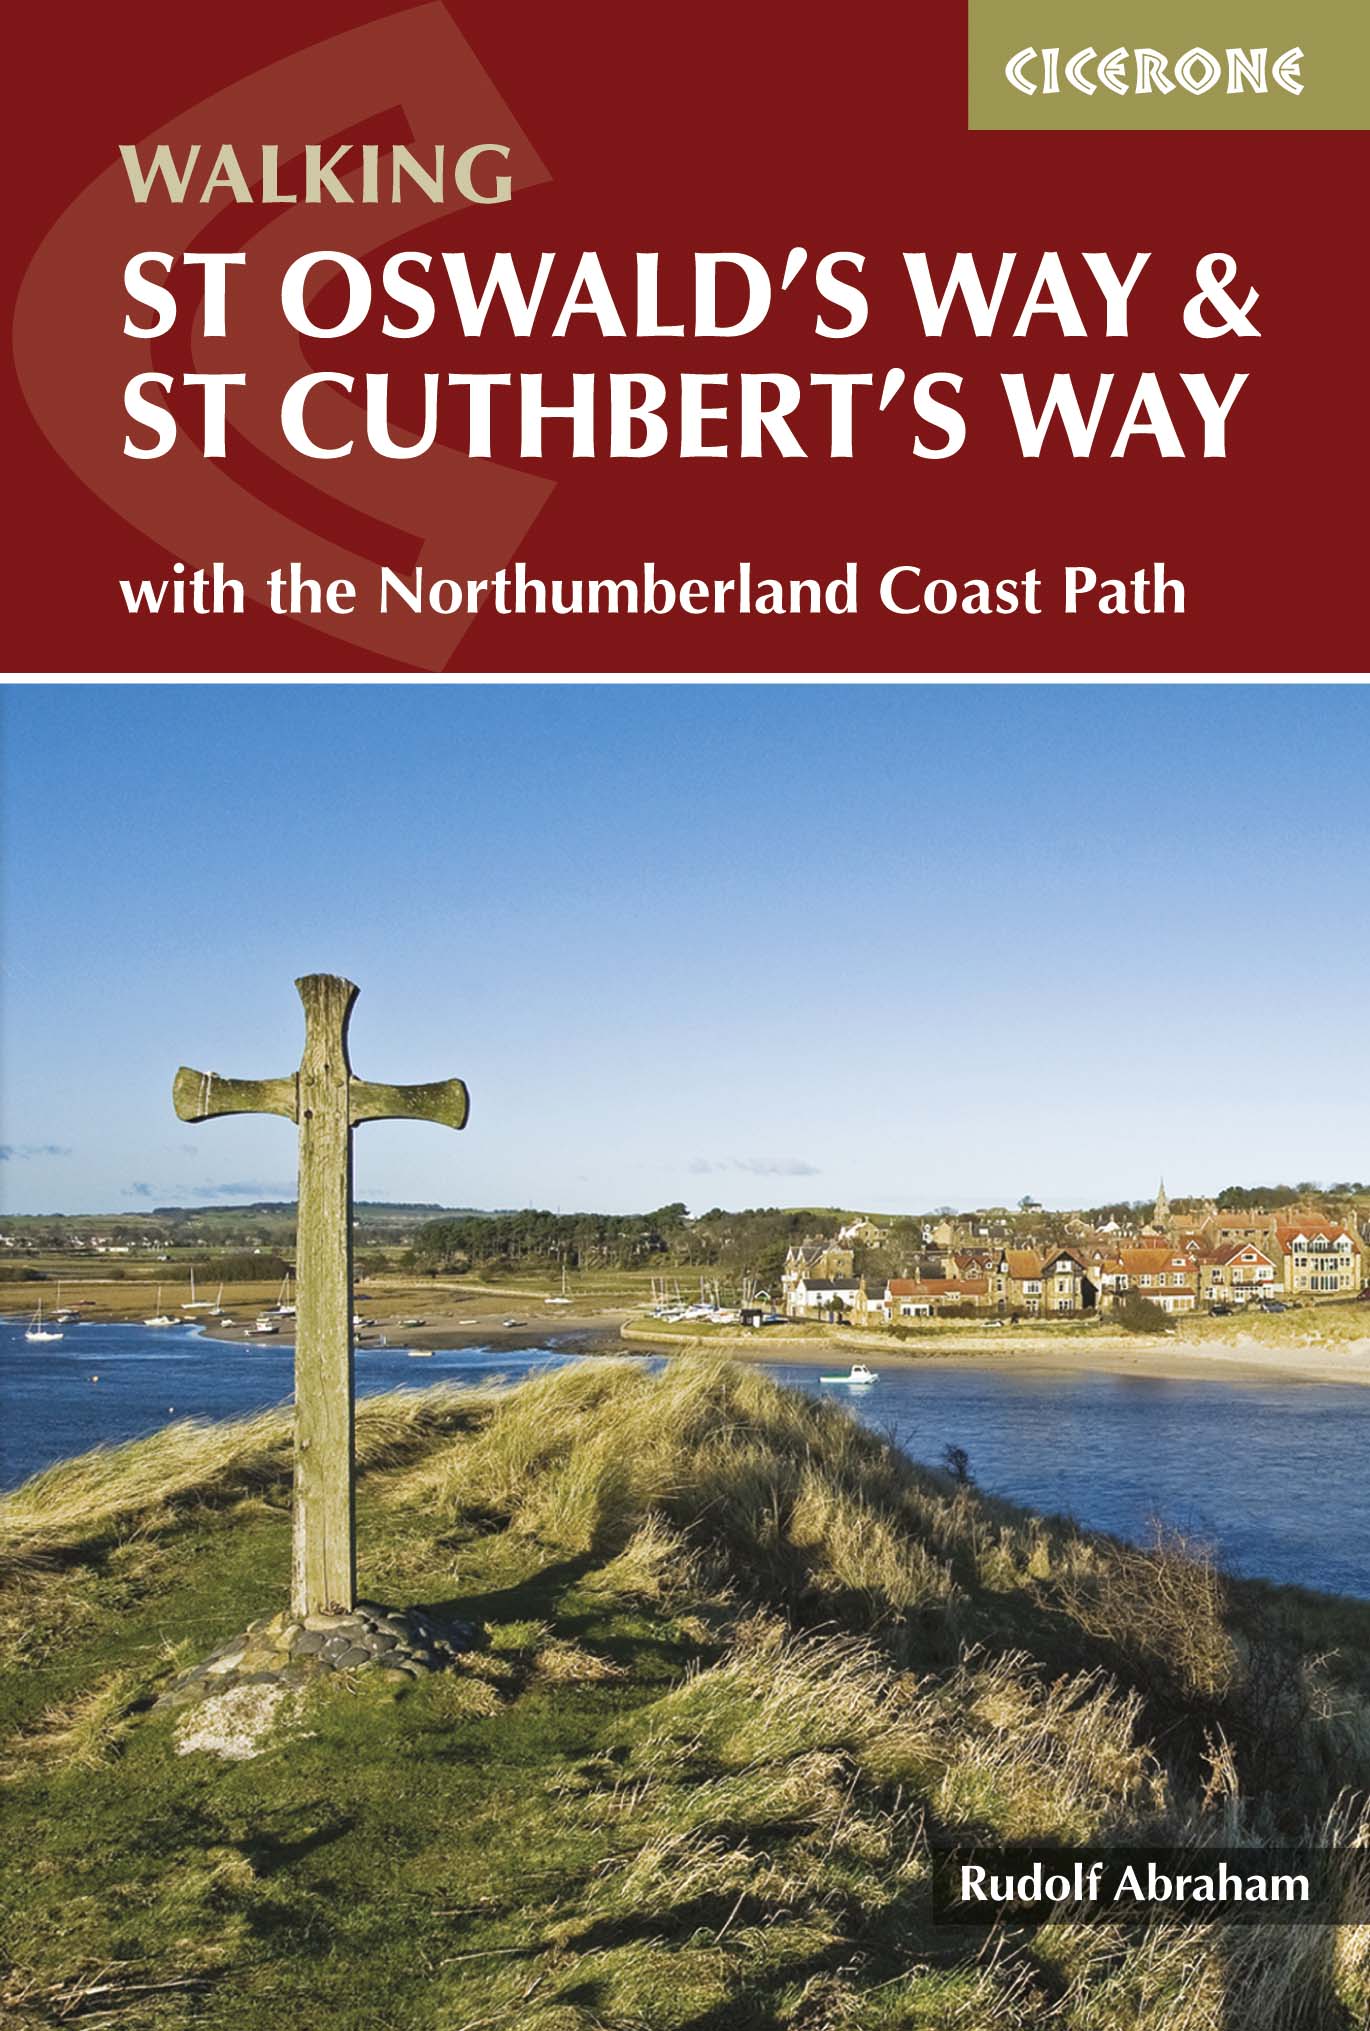 St Oswald's Way and St Cuthbert's Way